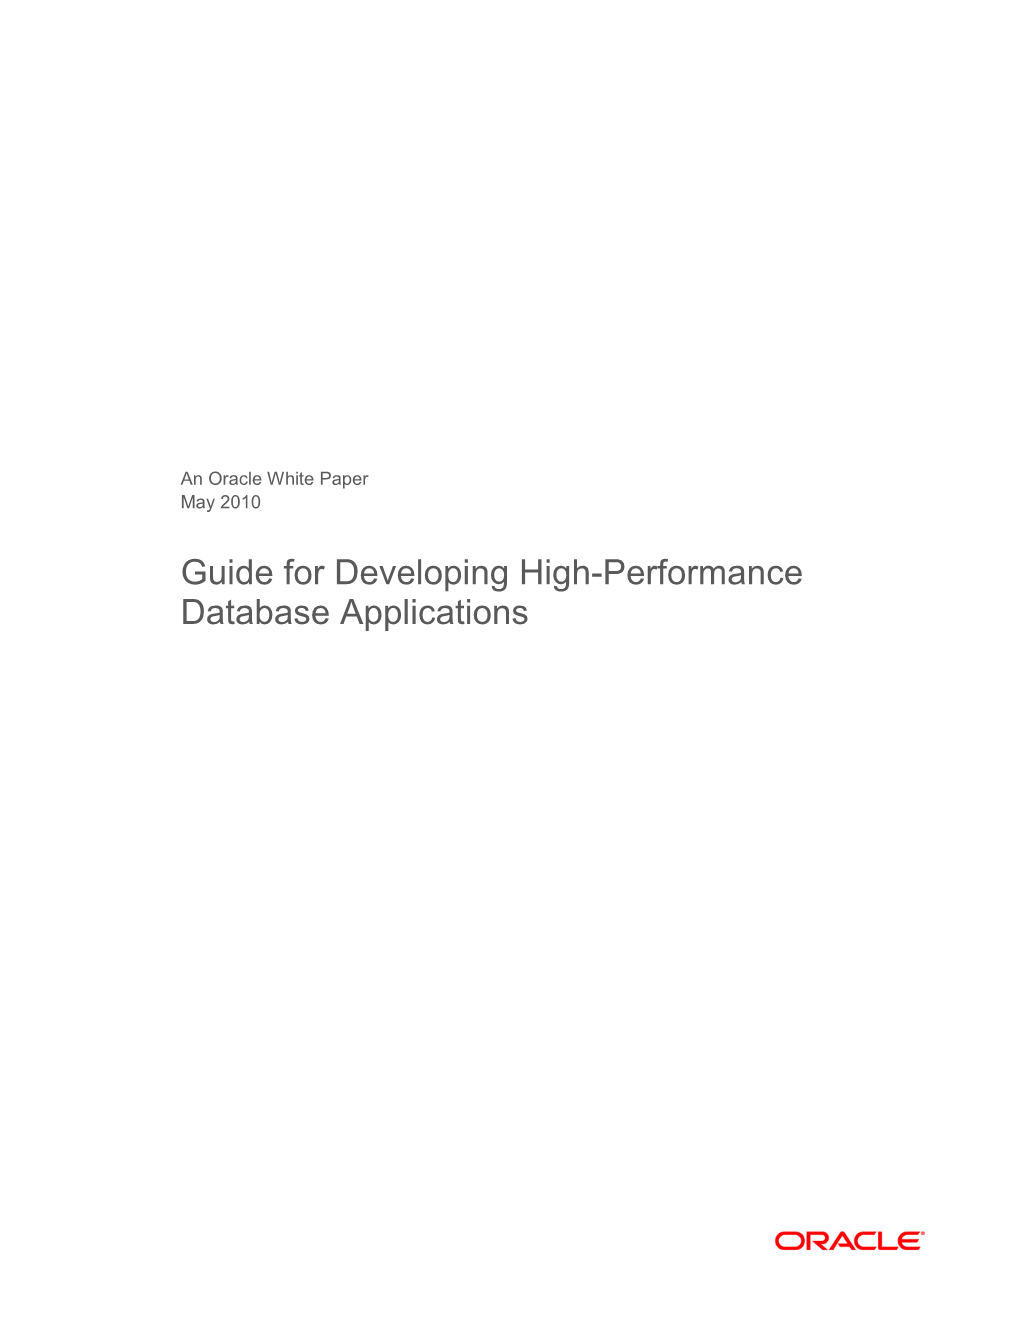 Guide for Developing High-Performance Database Applications